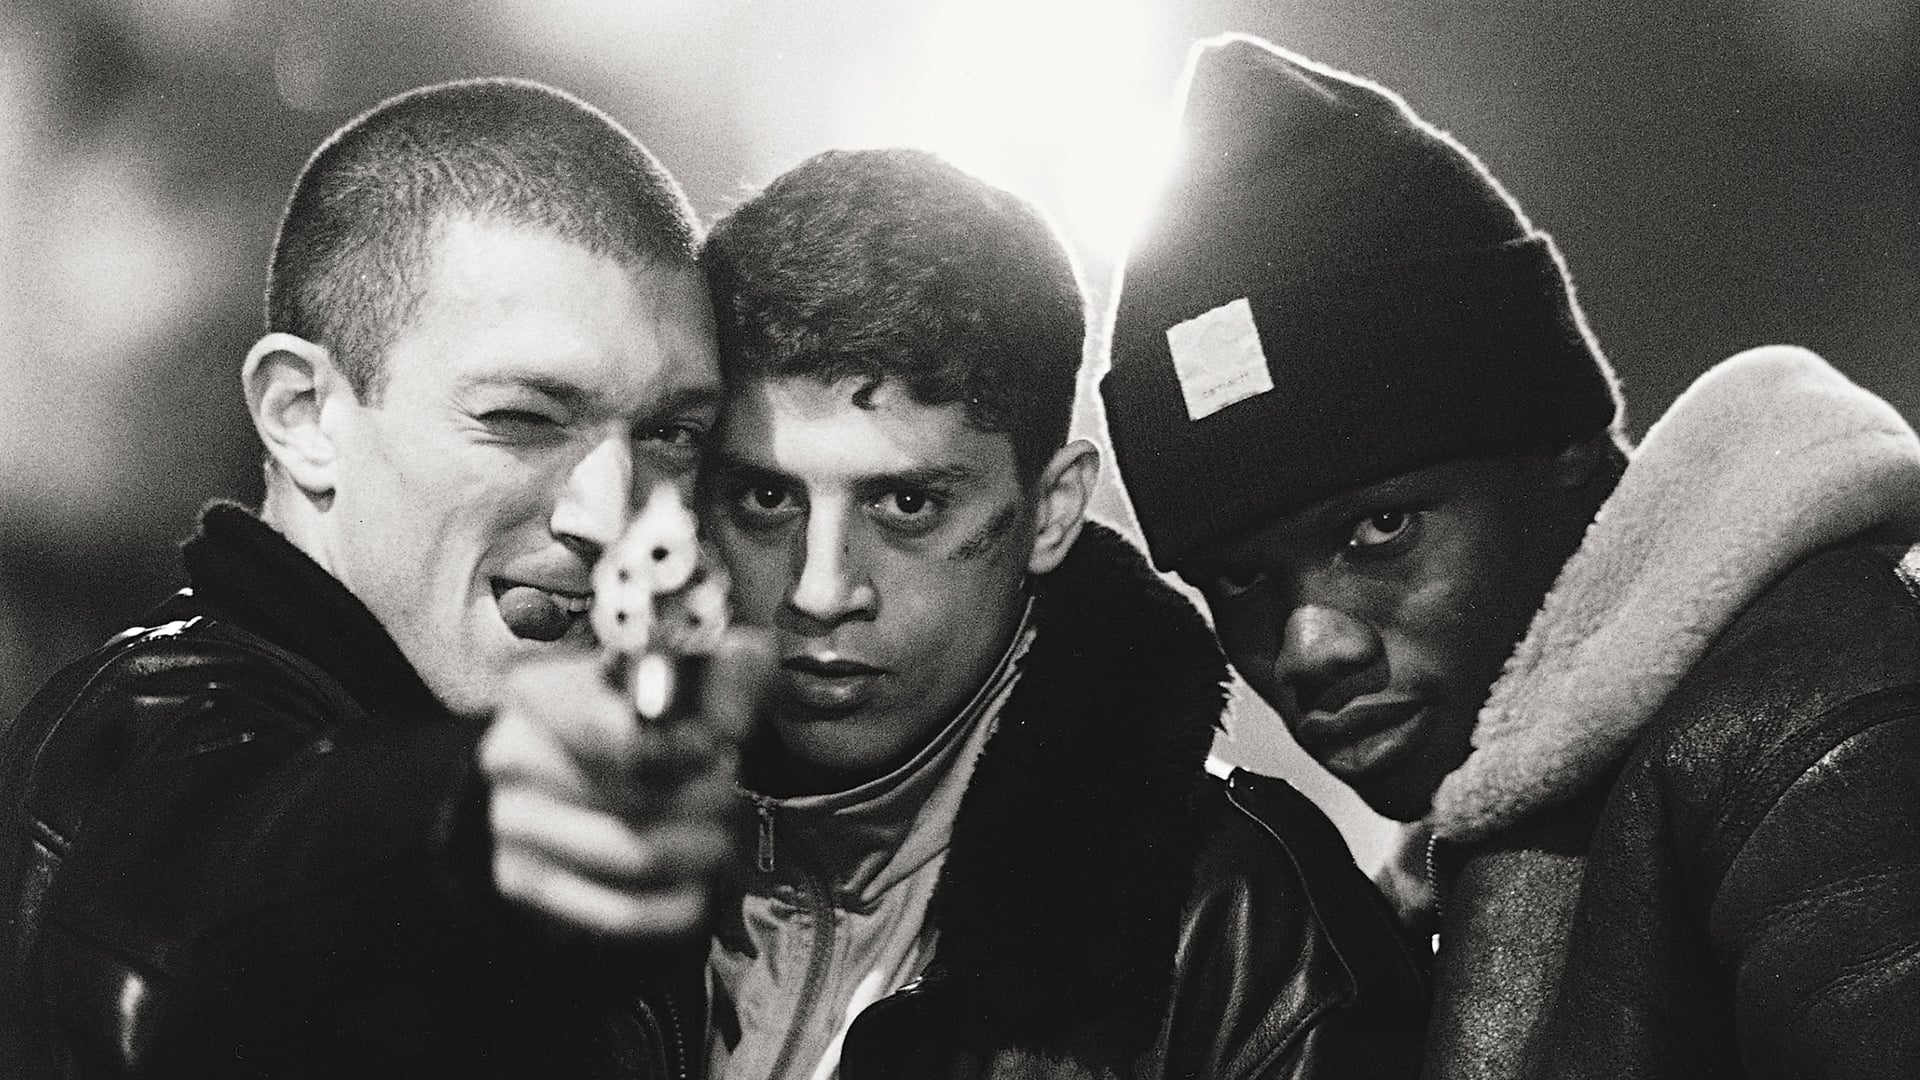 A black and white shot of three young men, holding a gun towards the camera